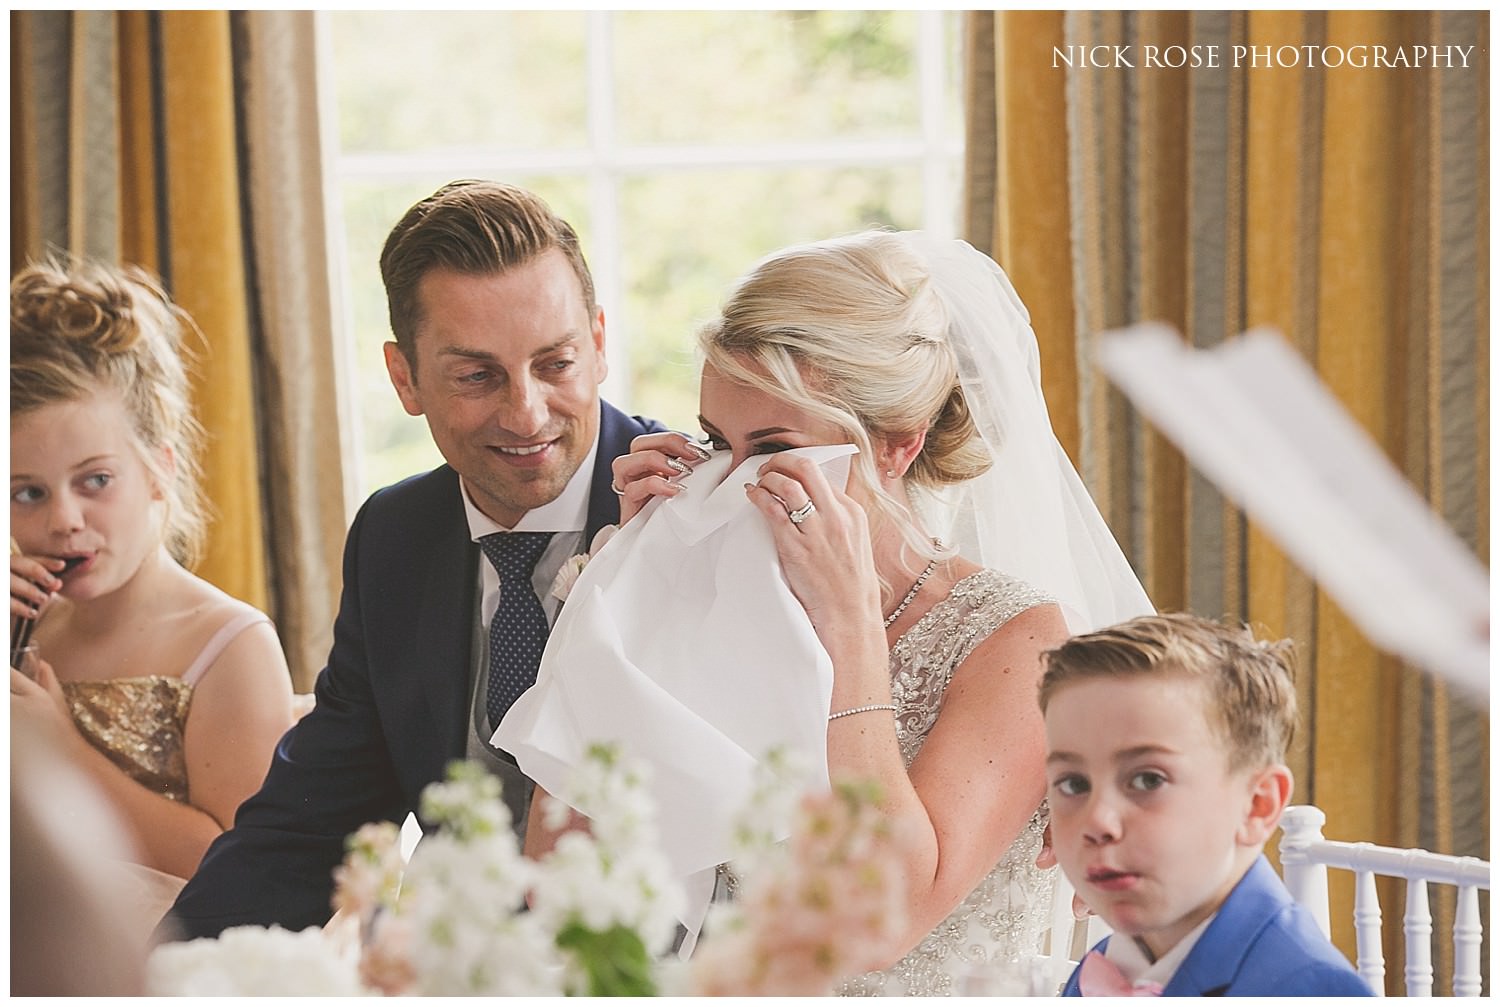  Bride wipes away a tear during the wedding speeches in the Rudding Park Hotel 